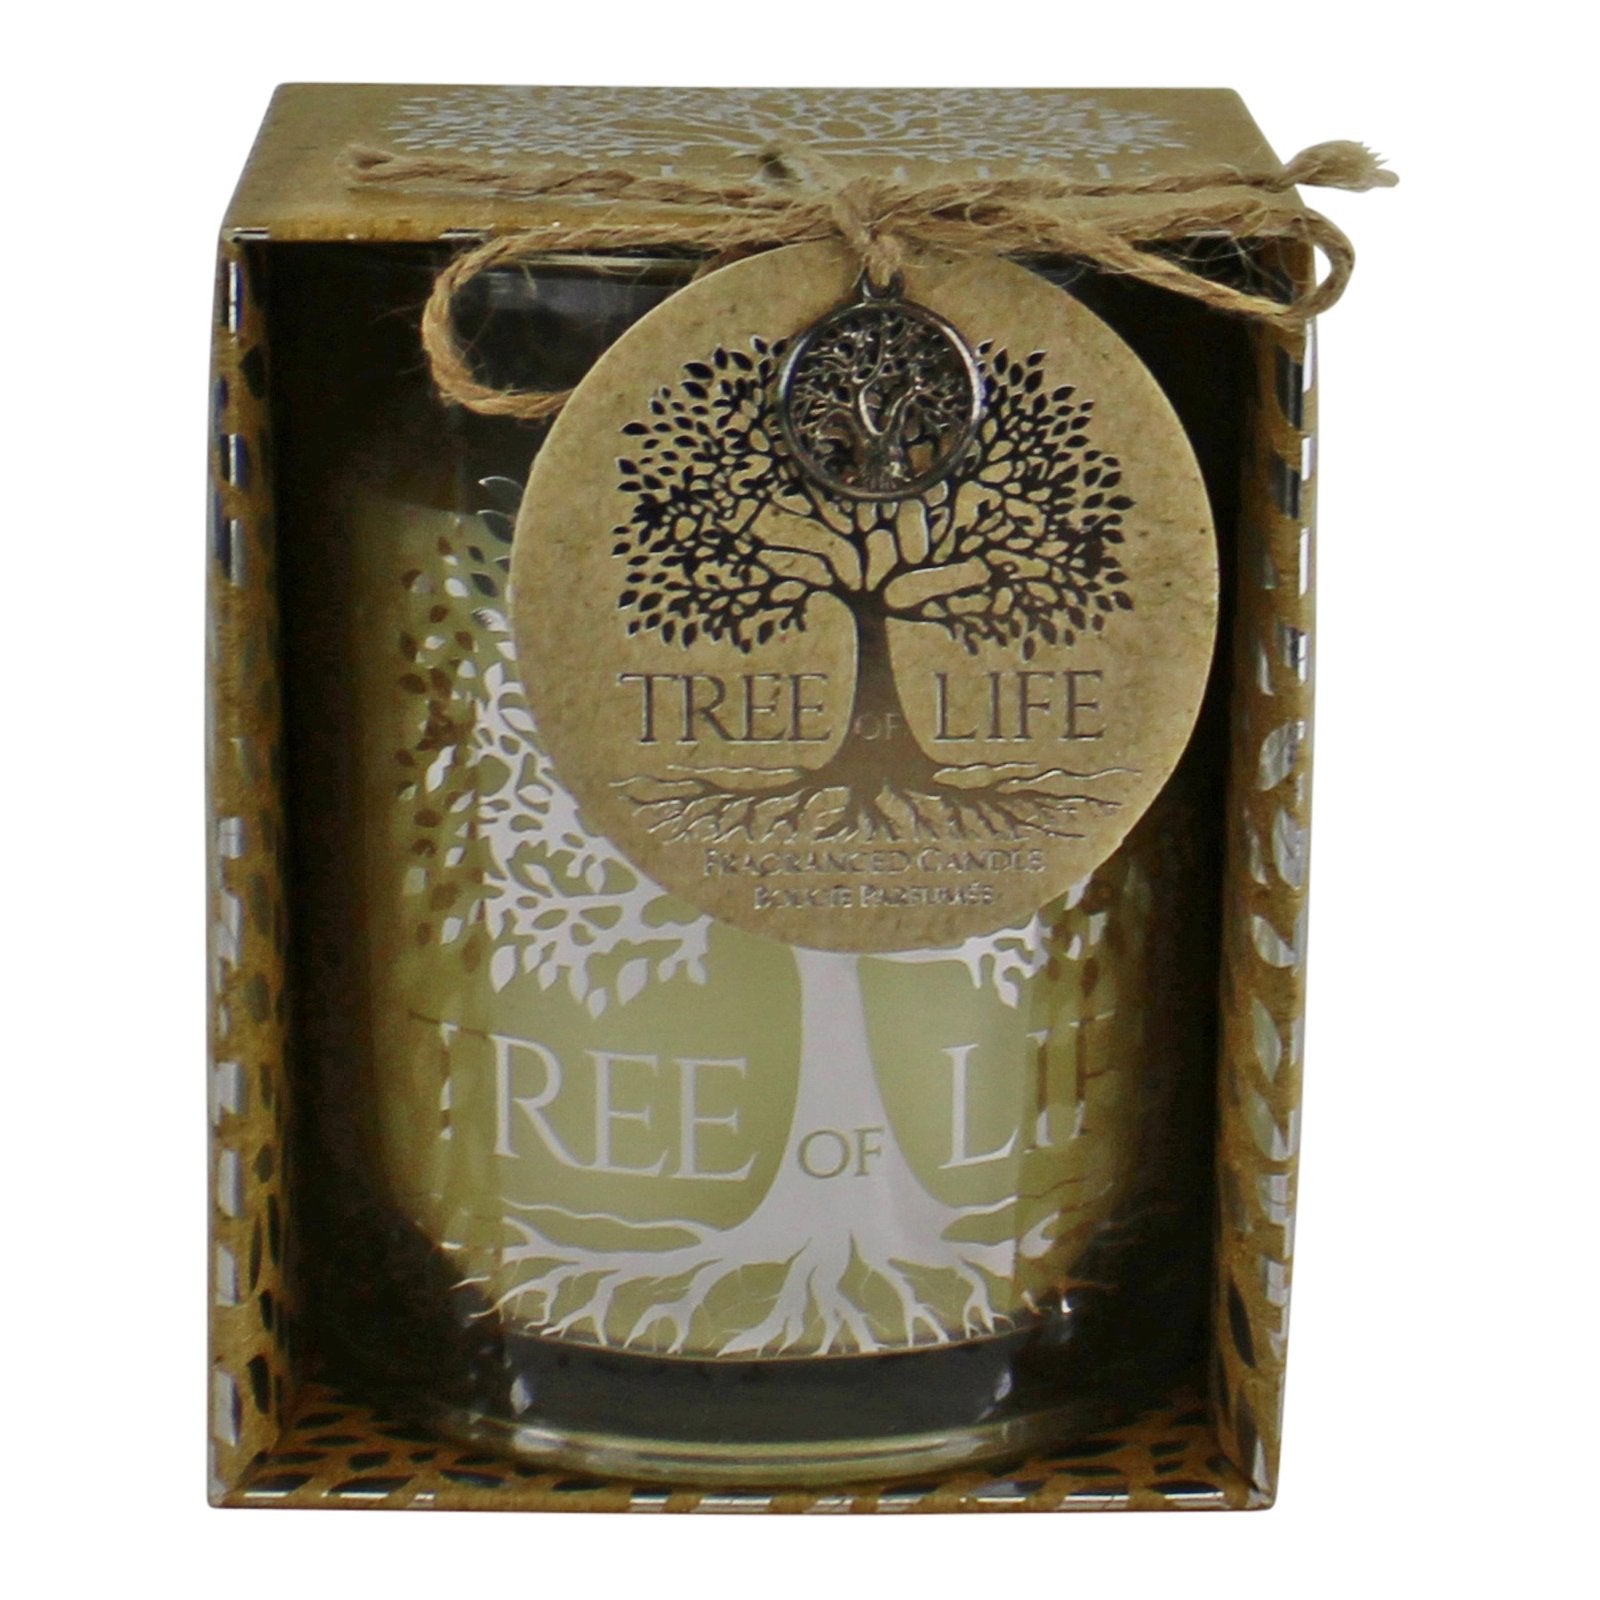 Tree Of Life Fragranced Candle In Gift Box - Kaftan direct